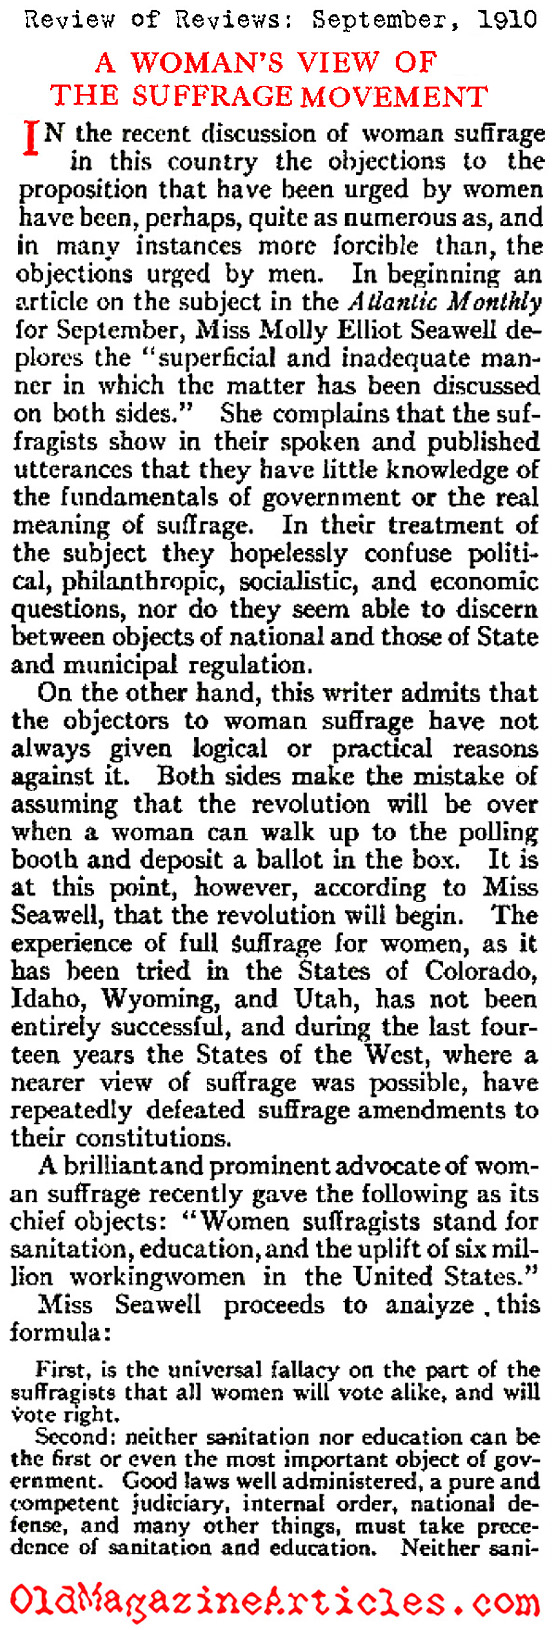 One Woman's Disenchantment with Feminism (Review of Reviews, 1910)